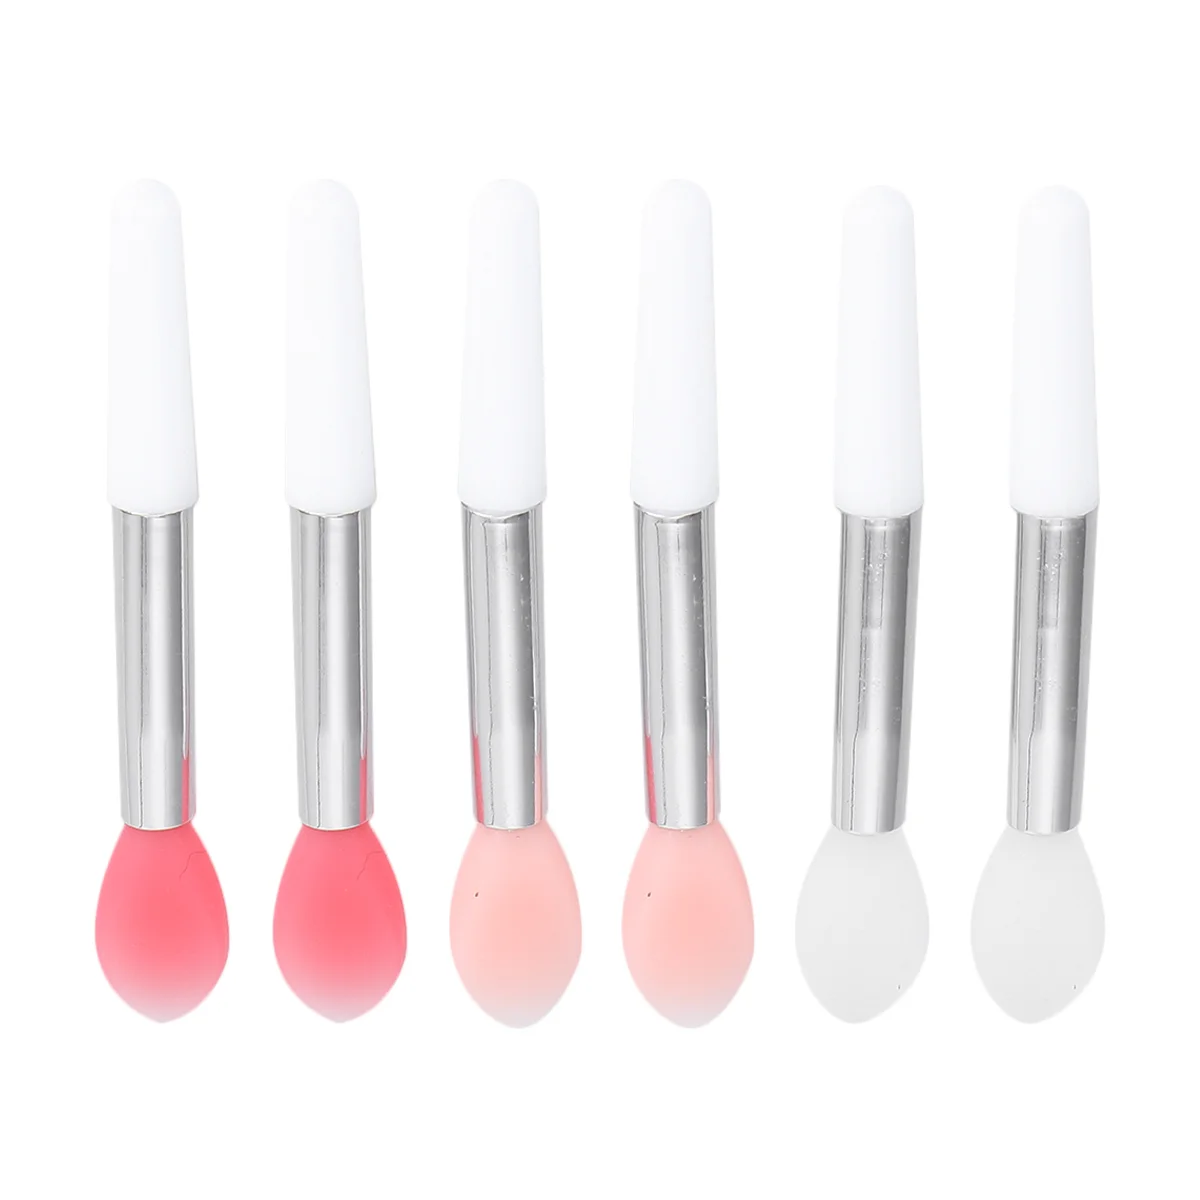 

6pcs Silicone Lip Brushes Lipstick Applicator Brushes Wand Tool for Smoother Fuller Lip Appearance 48mm